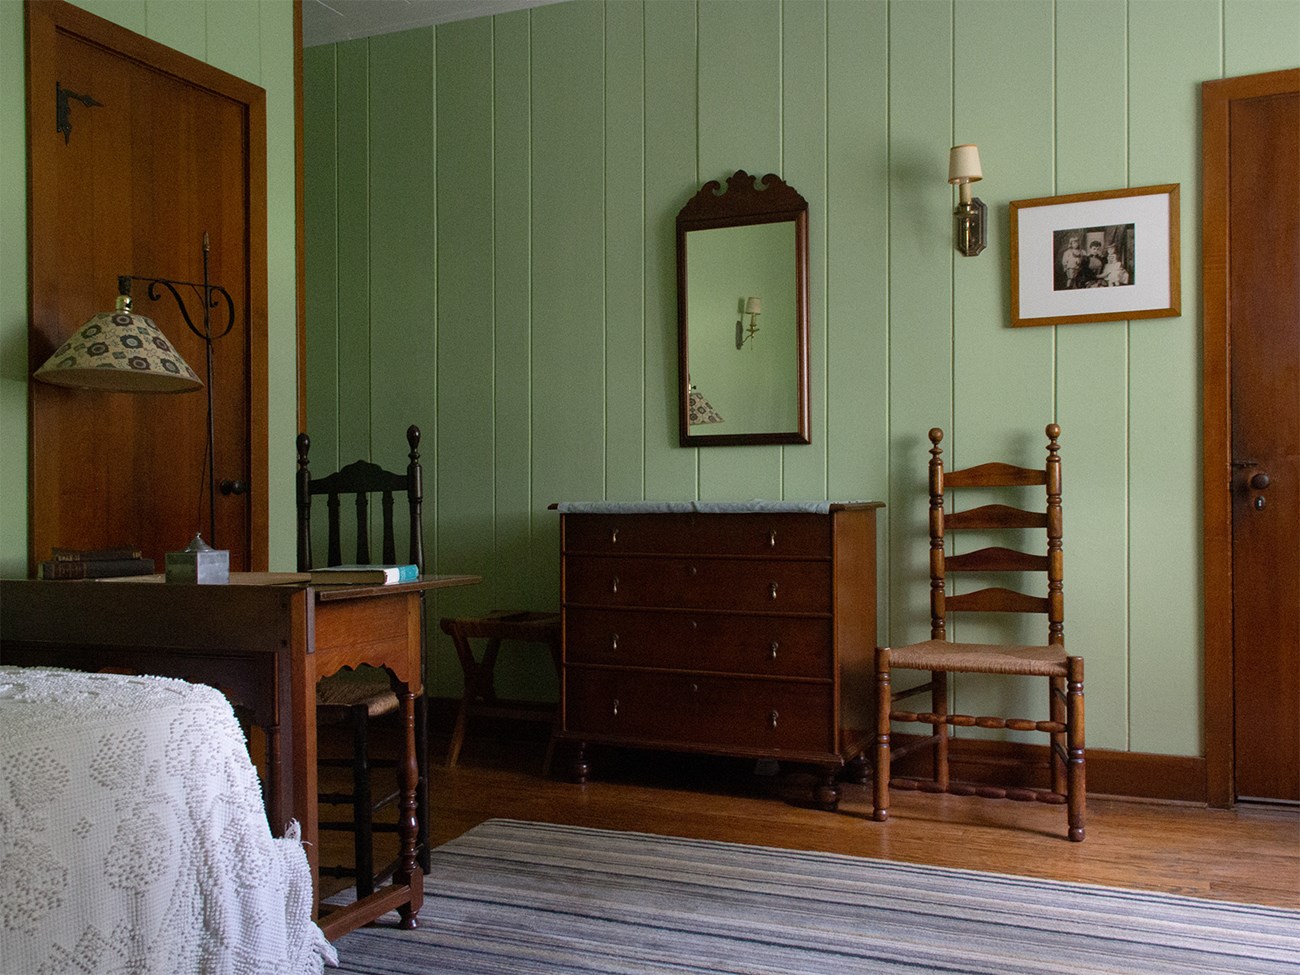 A room with beds, desk, and a chest of drawers.